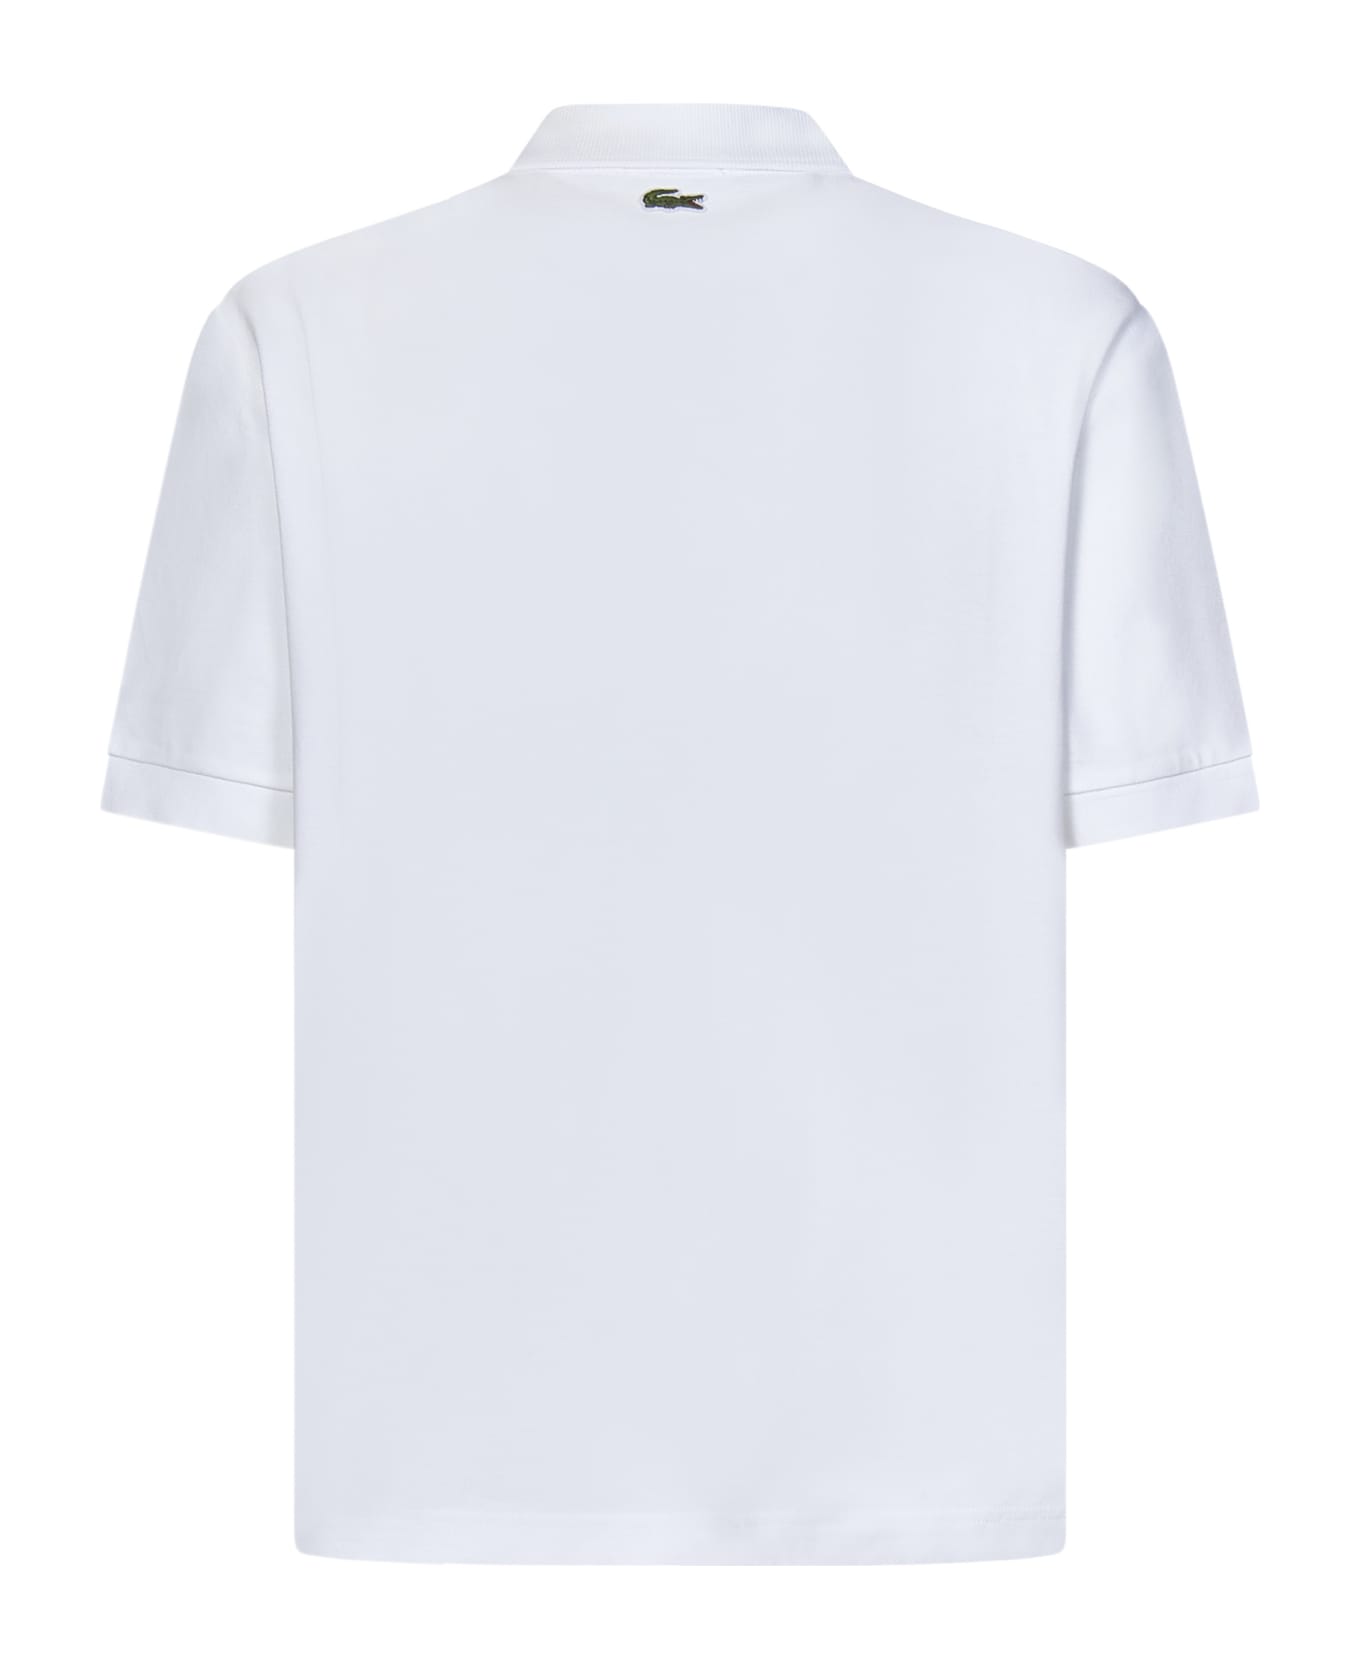 Lacoste Original Polo with L.12.12 Loose Fit Polo with Shirt - White